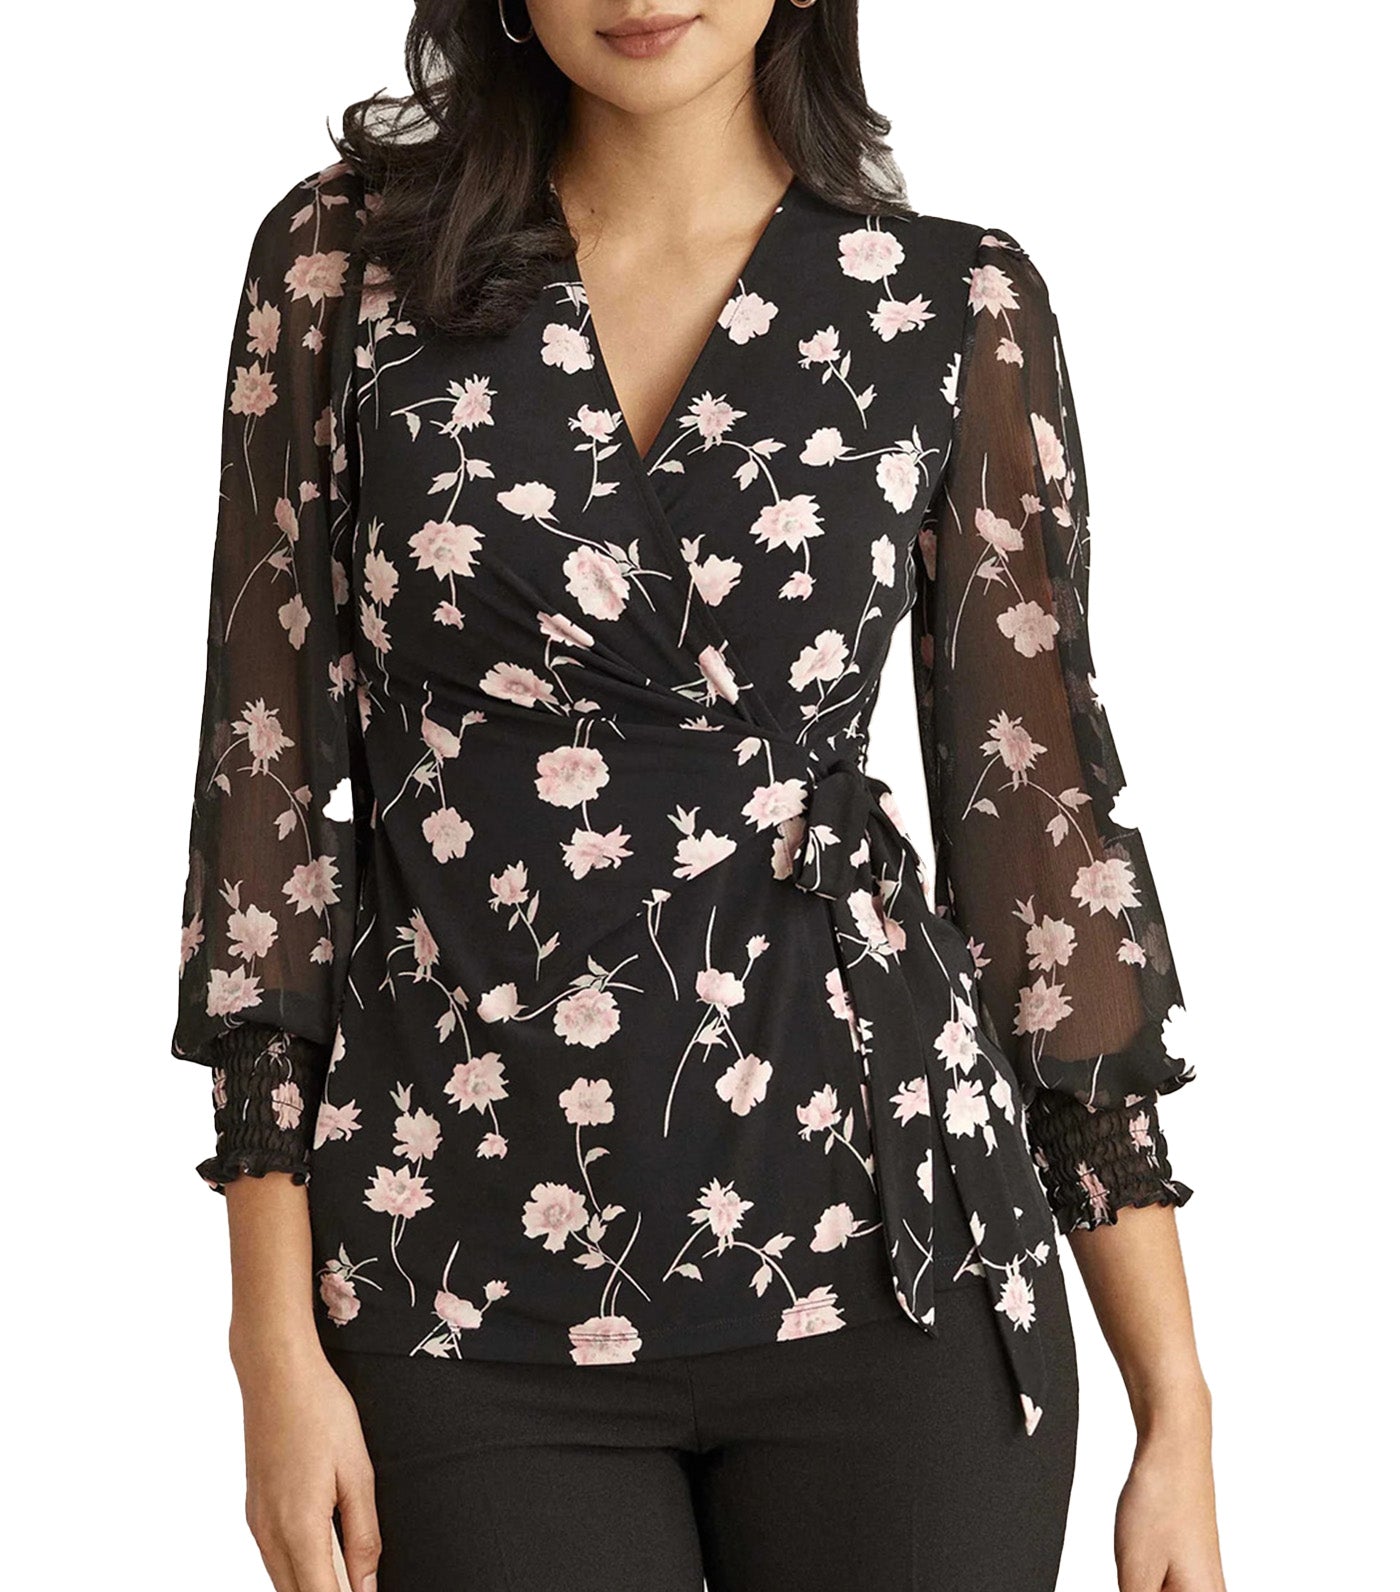 Printed Wrap Top with Sheer Sleeves Anne Black/Cherry Blossom Multi